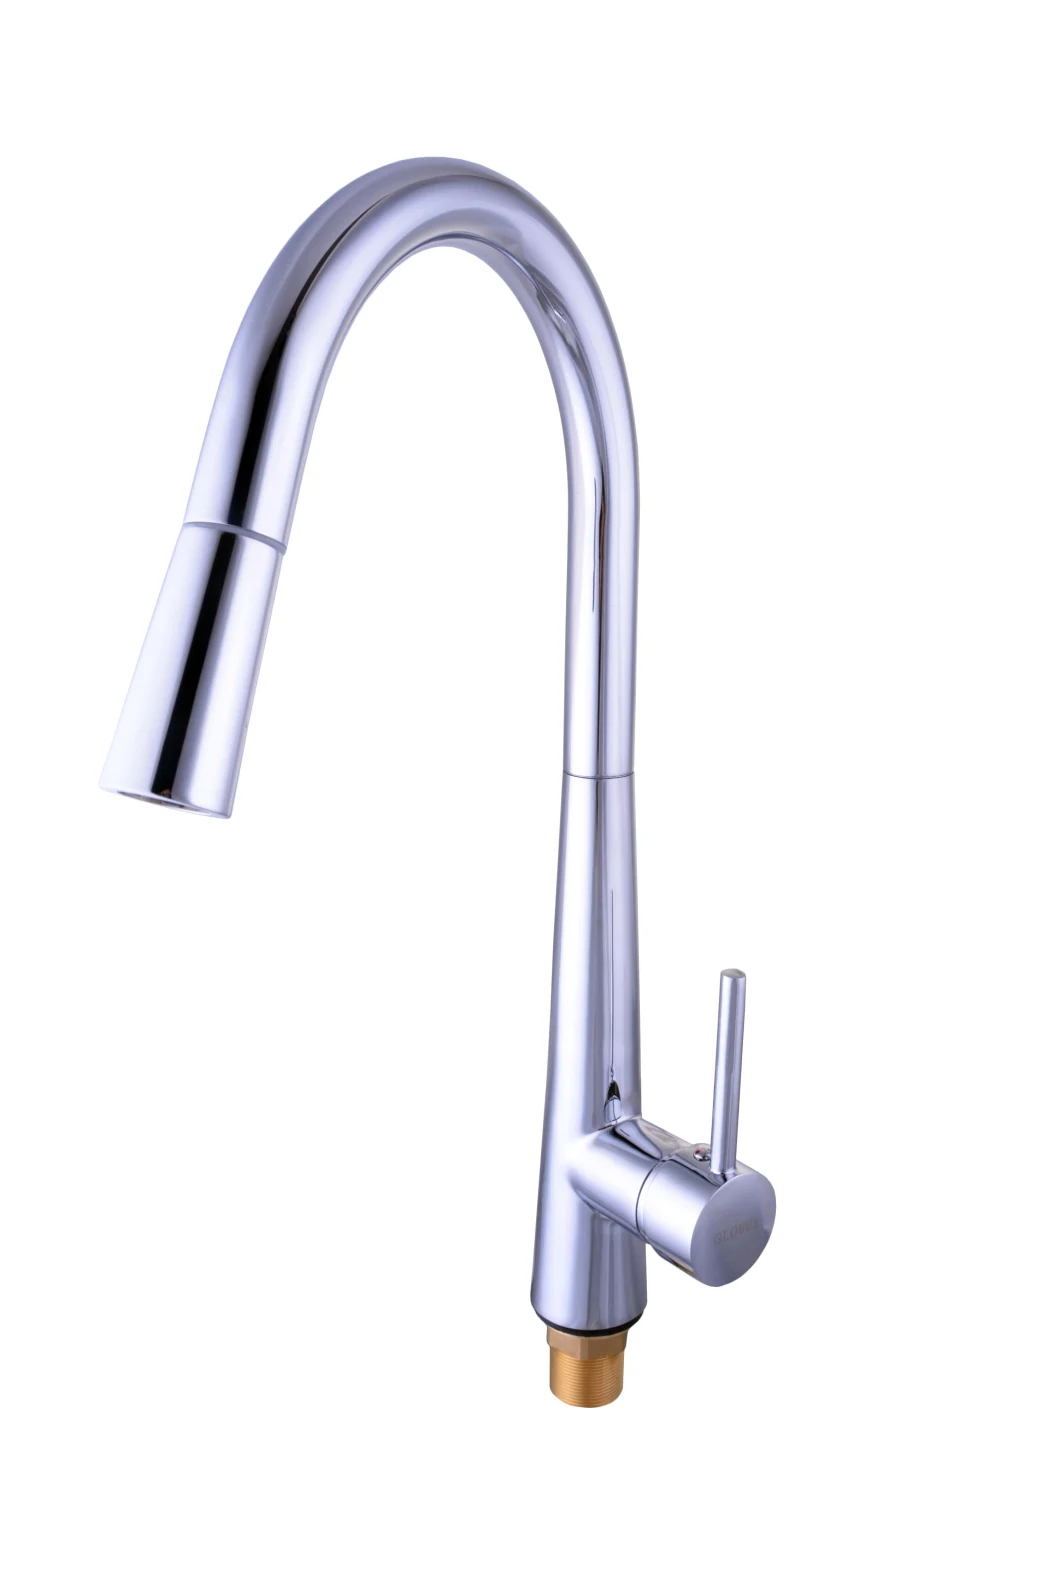 Chromed Single Handle Brass Sink Kitchen Faucet (H24-903S)